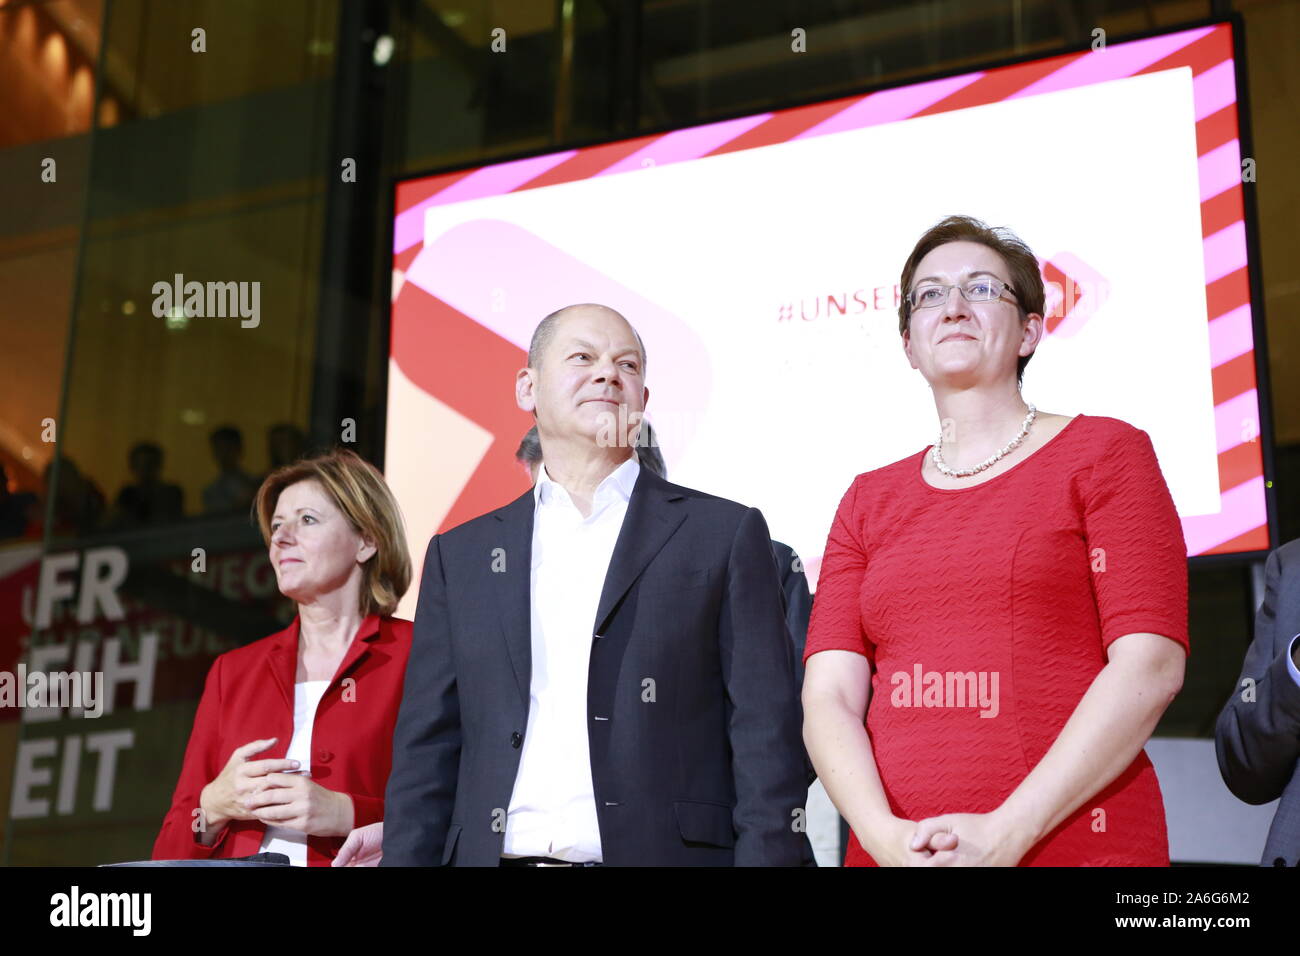 Germany, Berlin, 10/26/2019. Malu Dreyer, Olaf Scholz and Klara Geywitz in the SPD headquarters in Berlin. The SPD members elect Federal Finance Minister Olaf Scholz and Klara Geywitz just ahead of Norbert Walter-Borjans and Saskia Esken for the SPD presidency. The race for the SPD presidency goes into the runoff election in November: the two candidates will then be elected at the party congress. Stock Photo